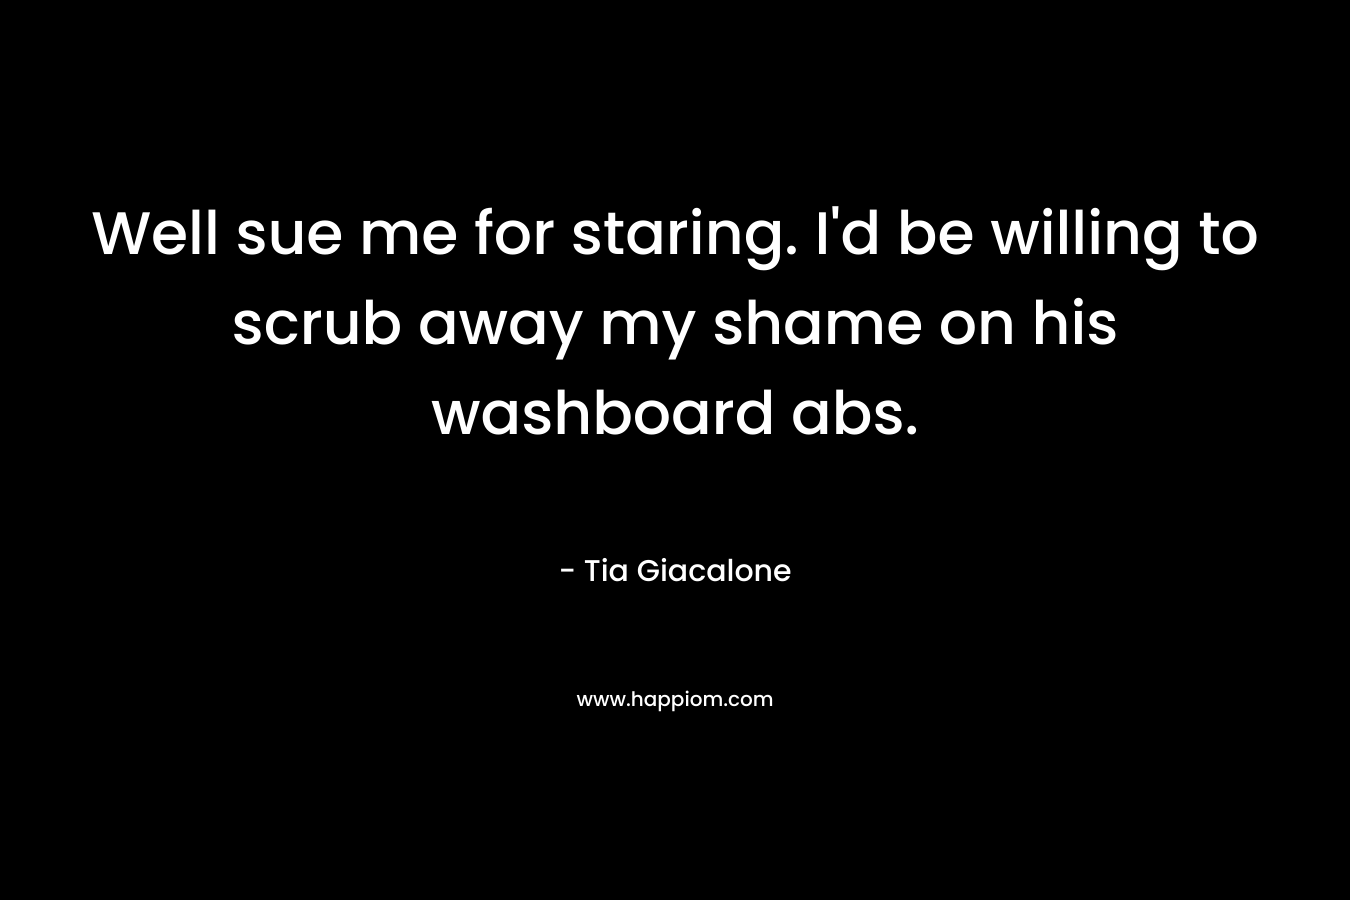 Well sue me for staring. I’d be willing to scrub away my shame on his washboard abs. – Tia Giacalone